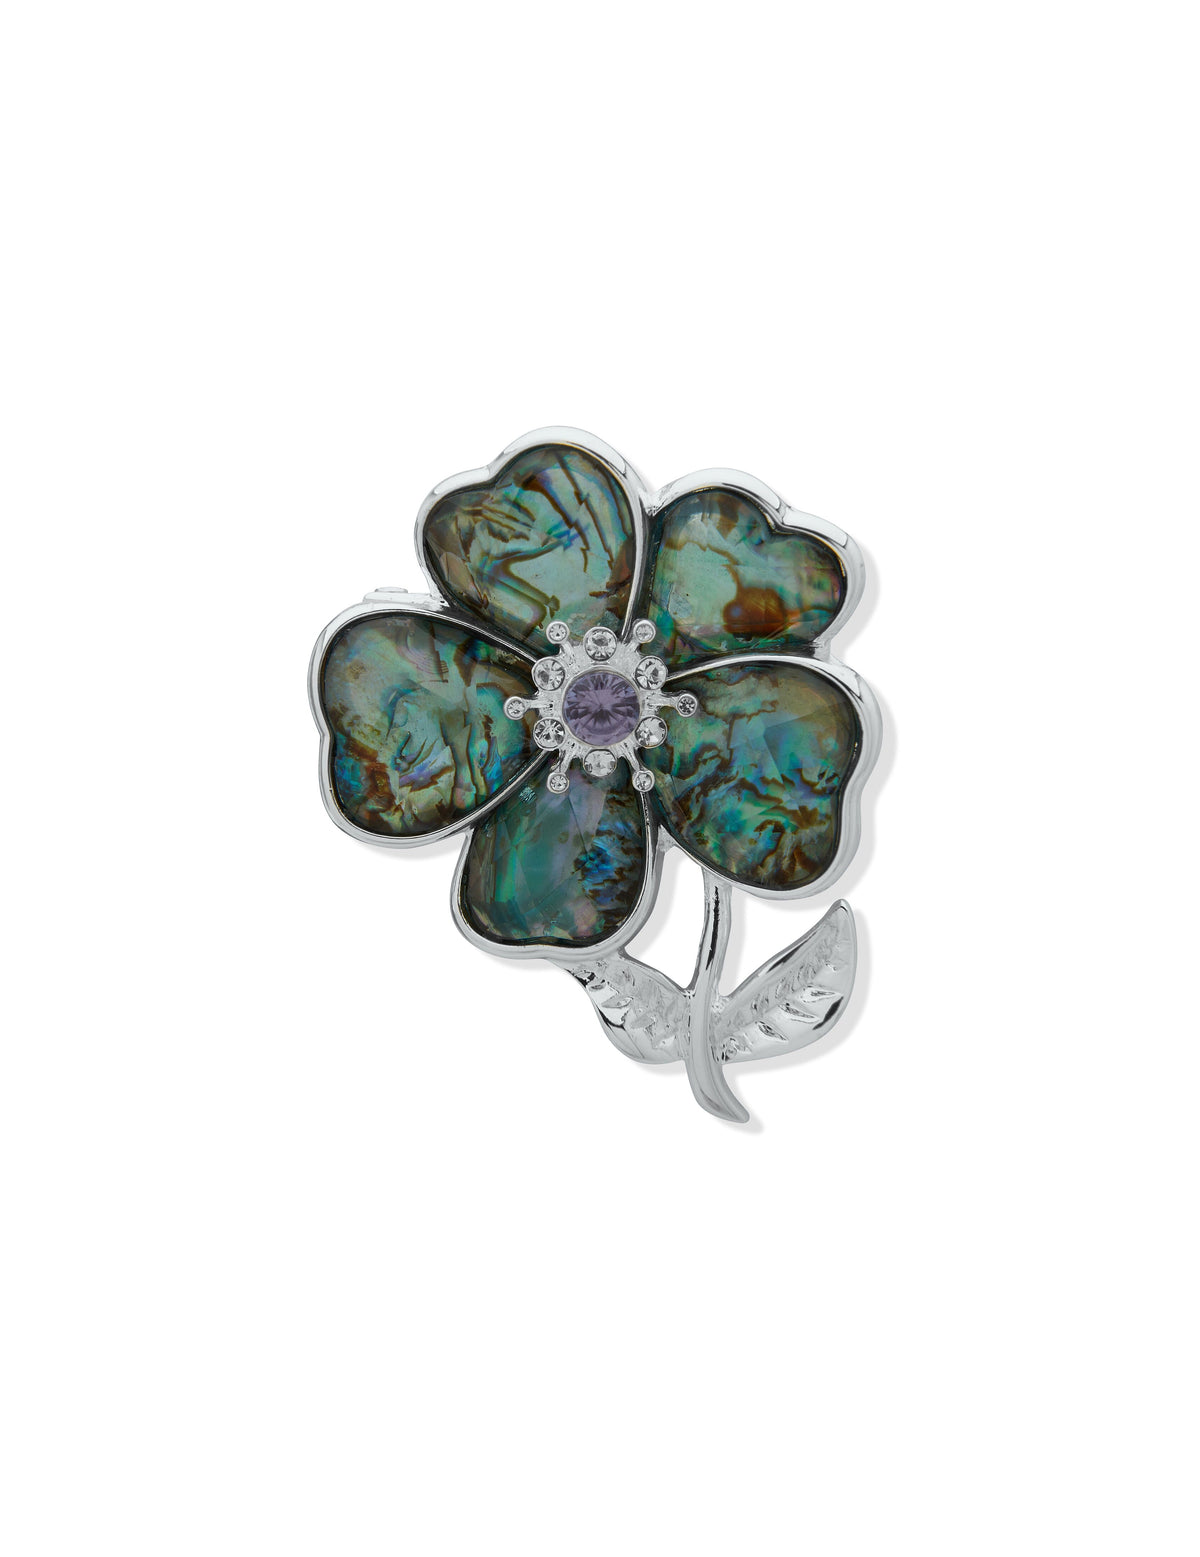 Anne Klein Silver Tone Silver and Blue Flower Brooch in Gift Box